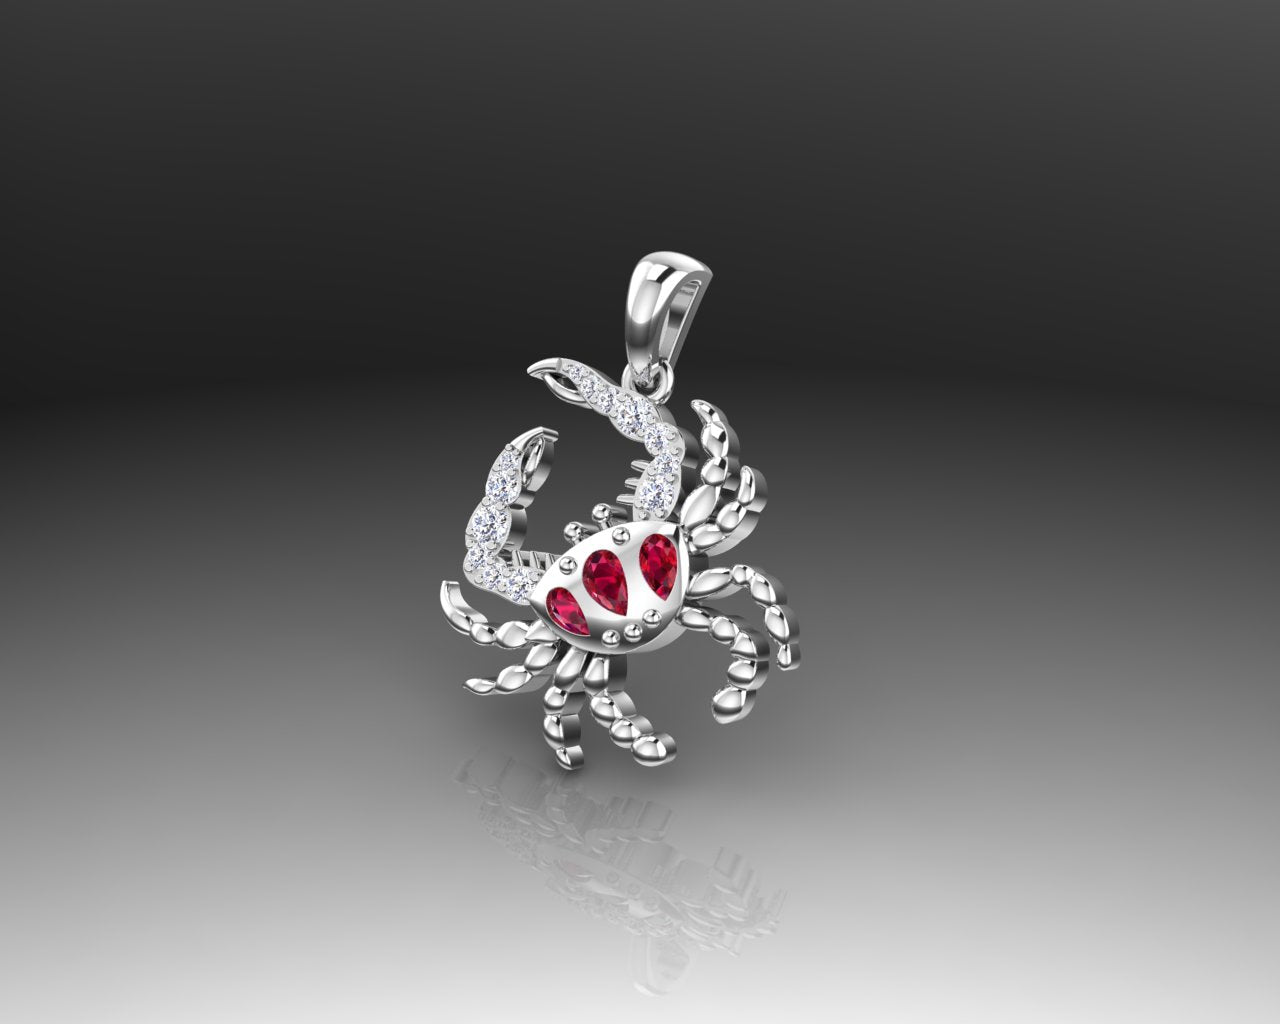 GOLD RUBY DIMAOND CRAB PENDANT - Reigning Jewels Fine Jewelry 